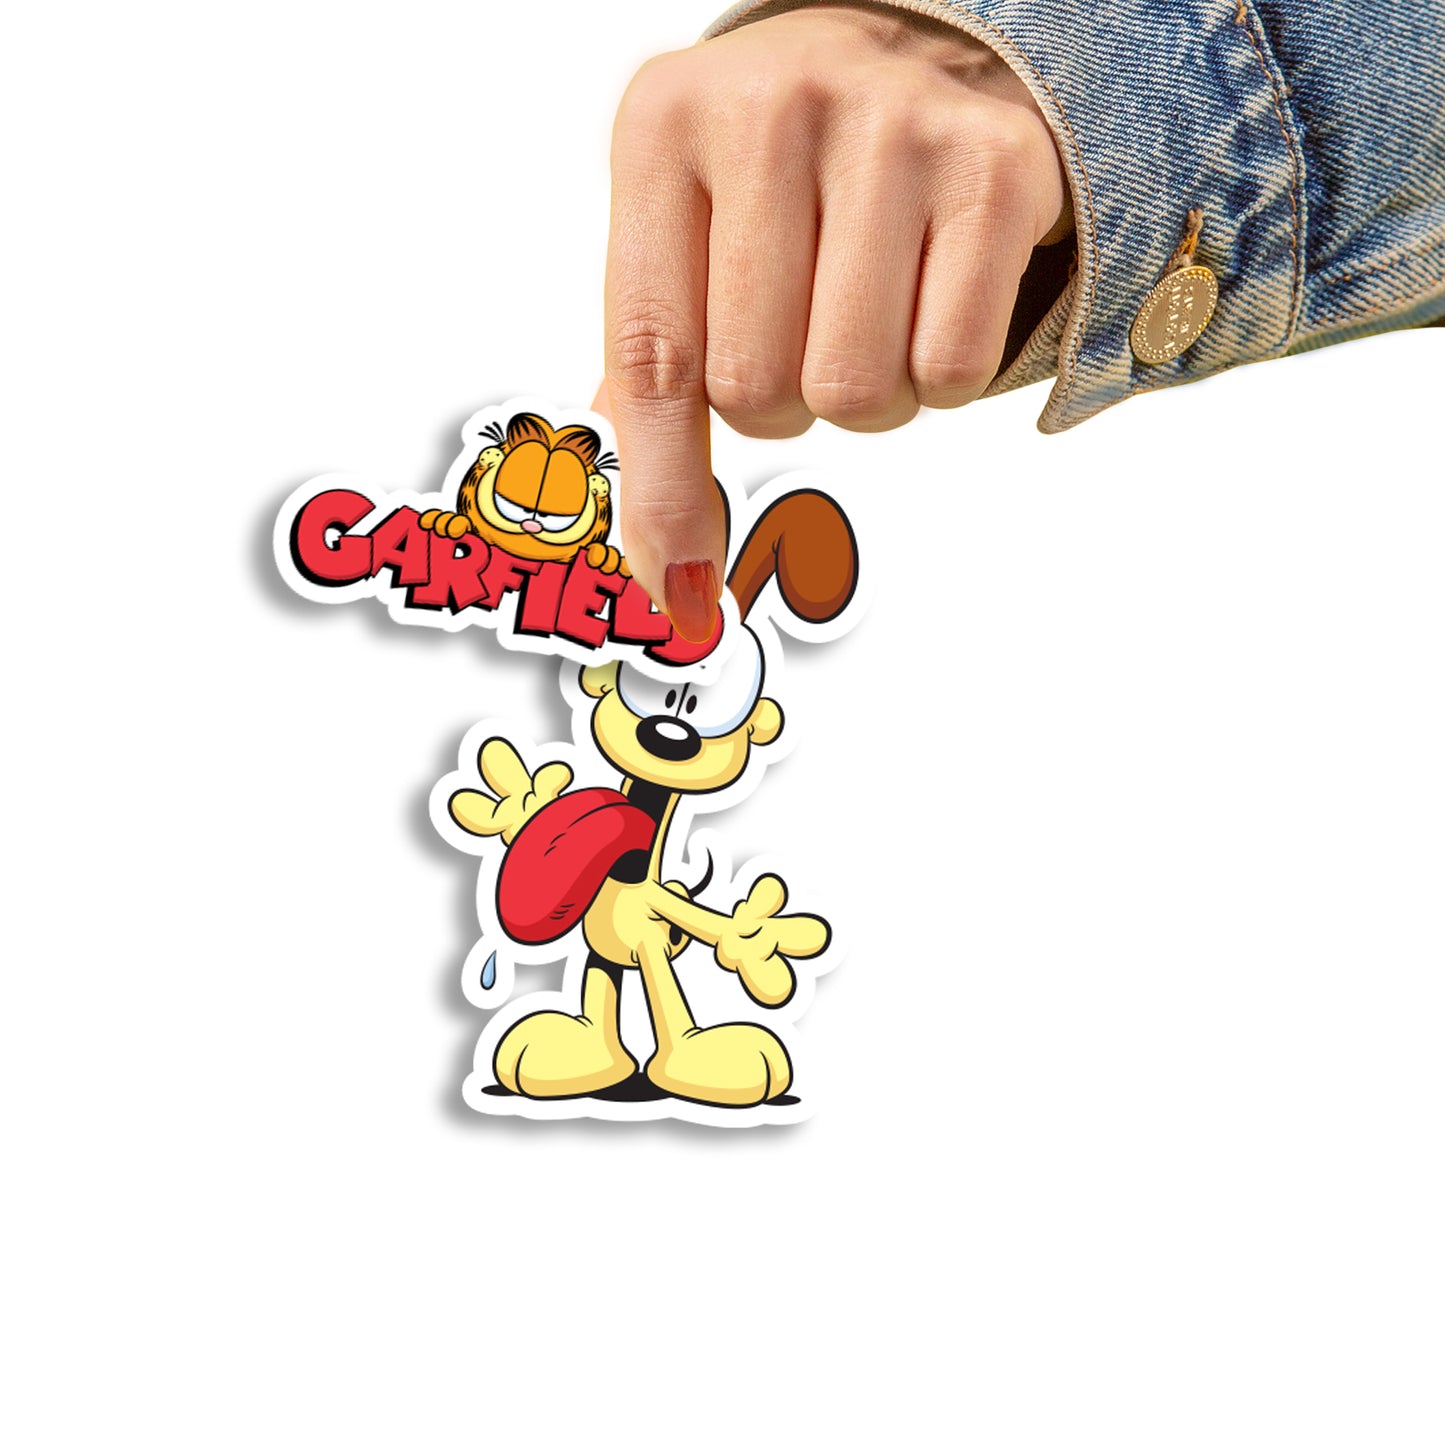 Garfield: Odie Minis - Officially Licensed Nickelodeon Removable Adhesive Decal